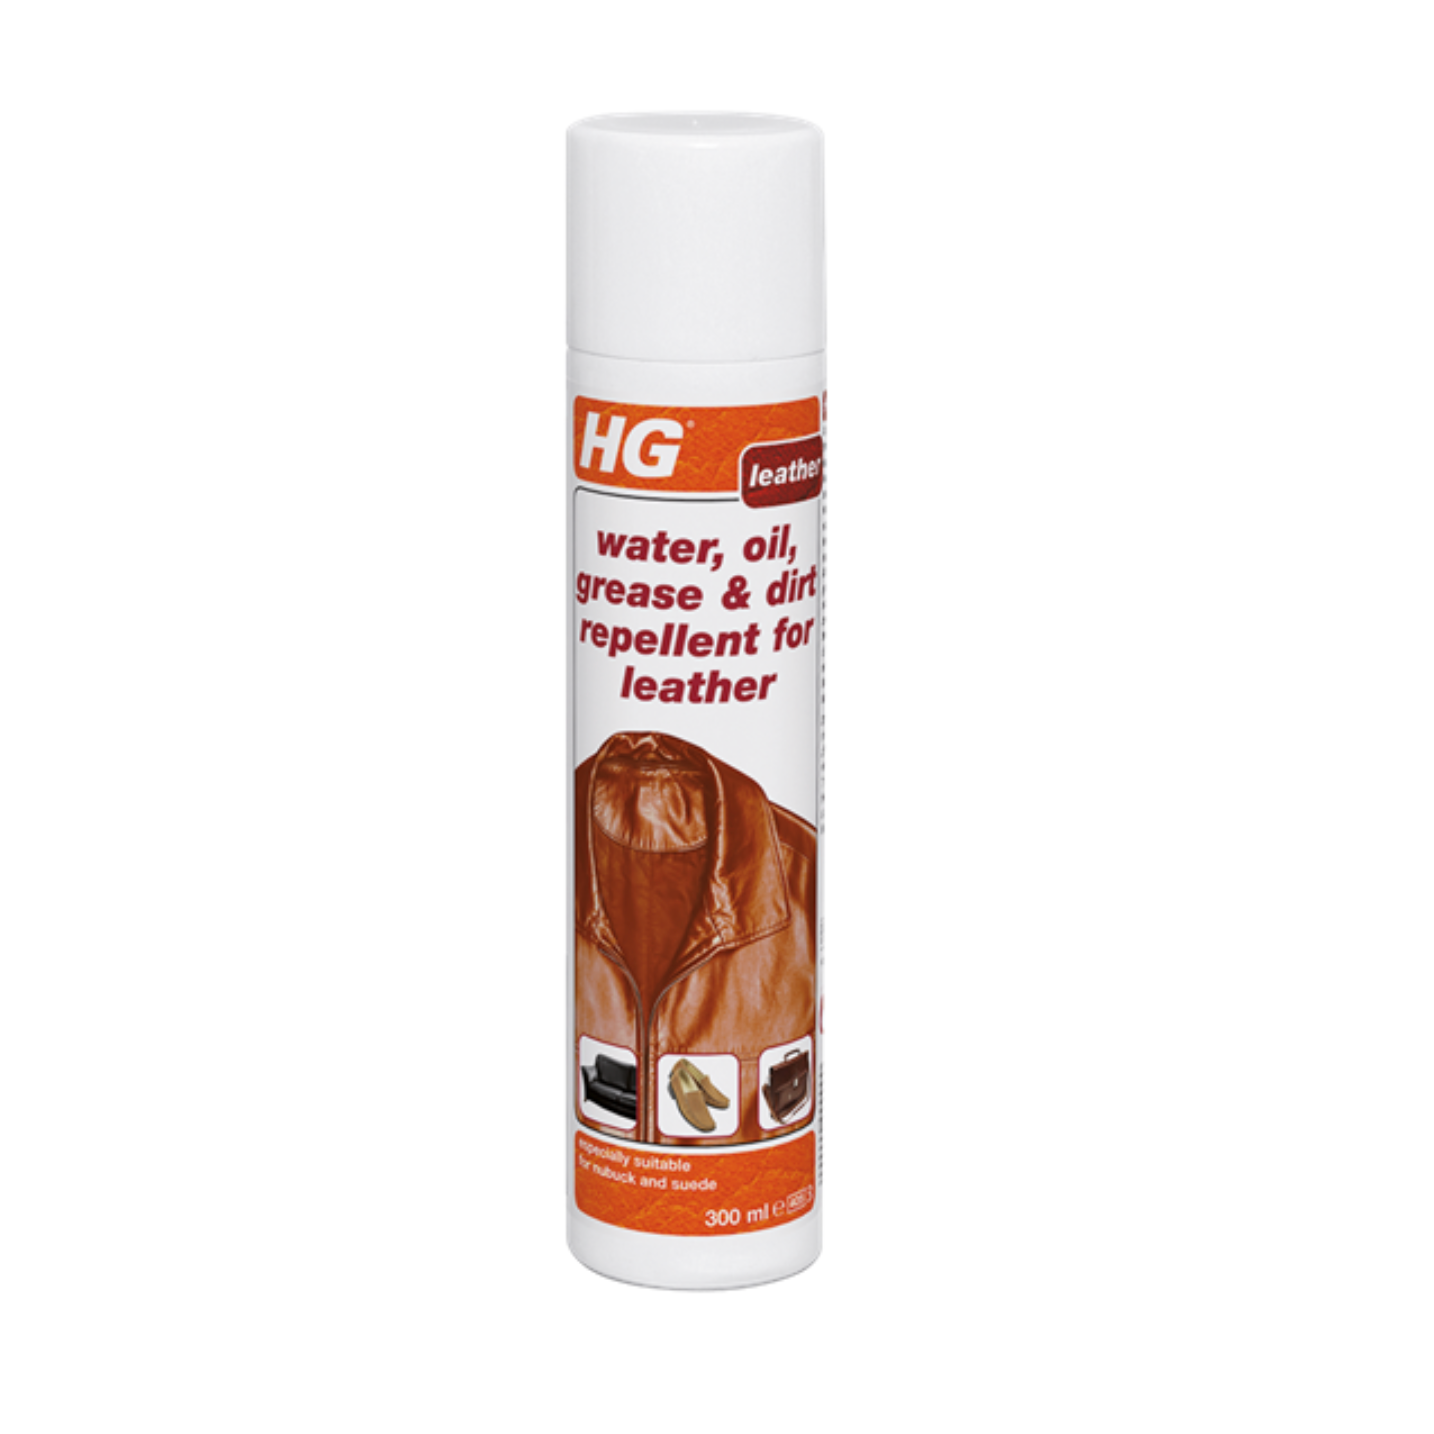 Water, Oil, Grease & Dirt Repellent for Leather